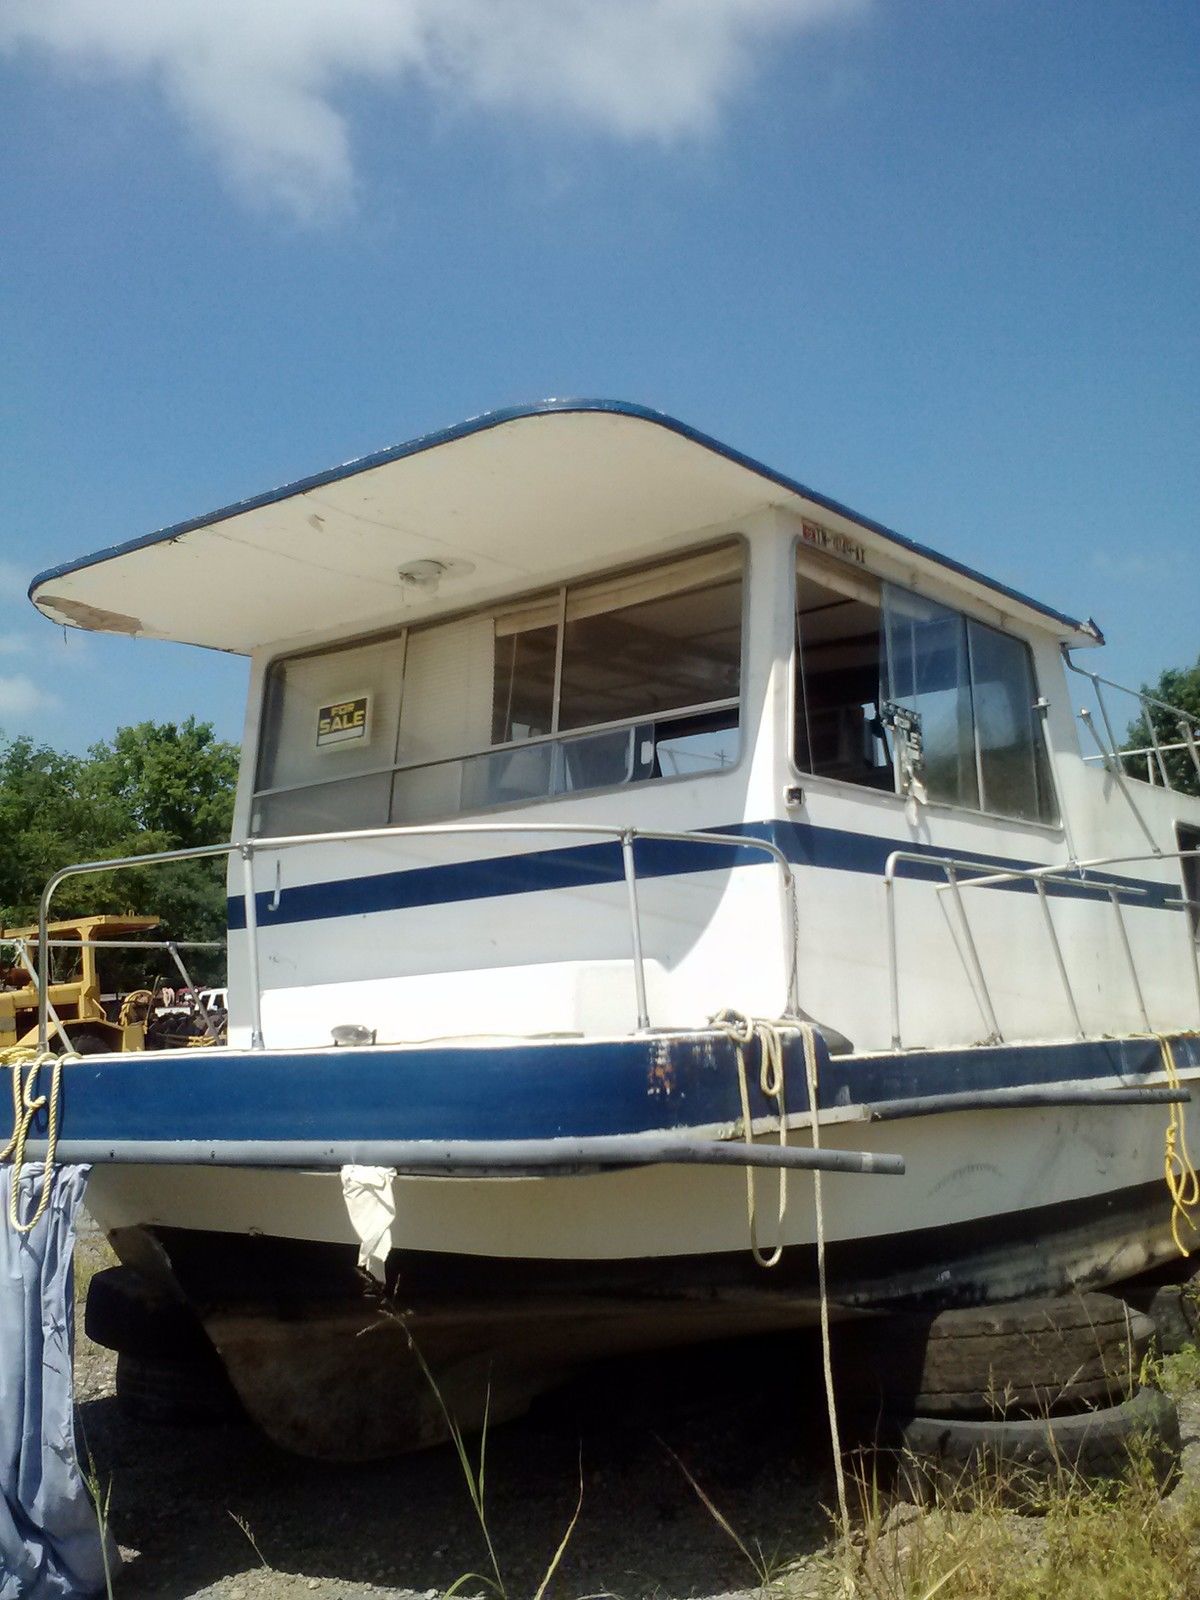 GIBSON 32 FT HOUSEBOAT Needs Some Tender Care But Can Be Eaisly Made Whole Again